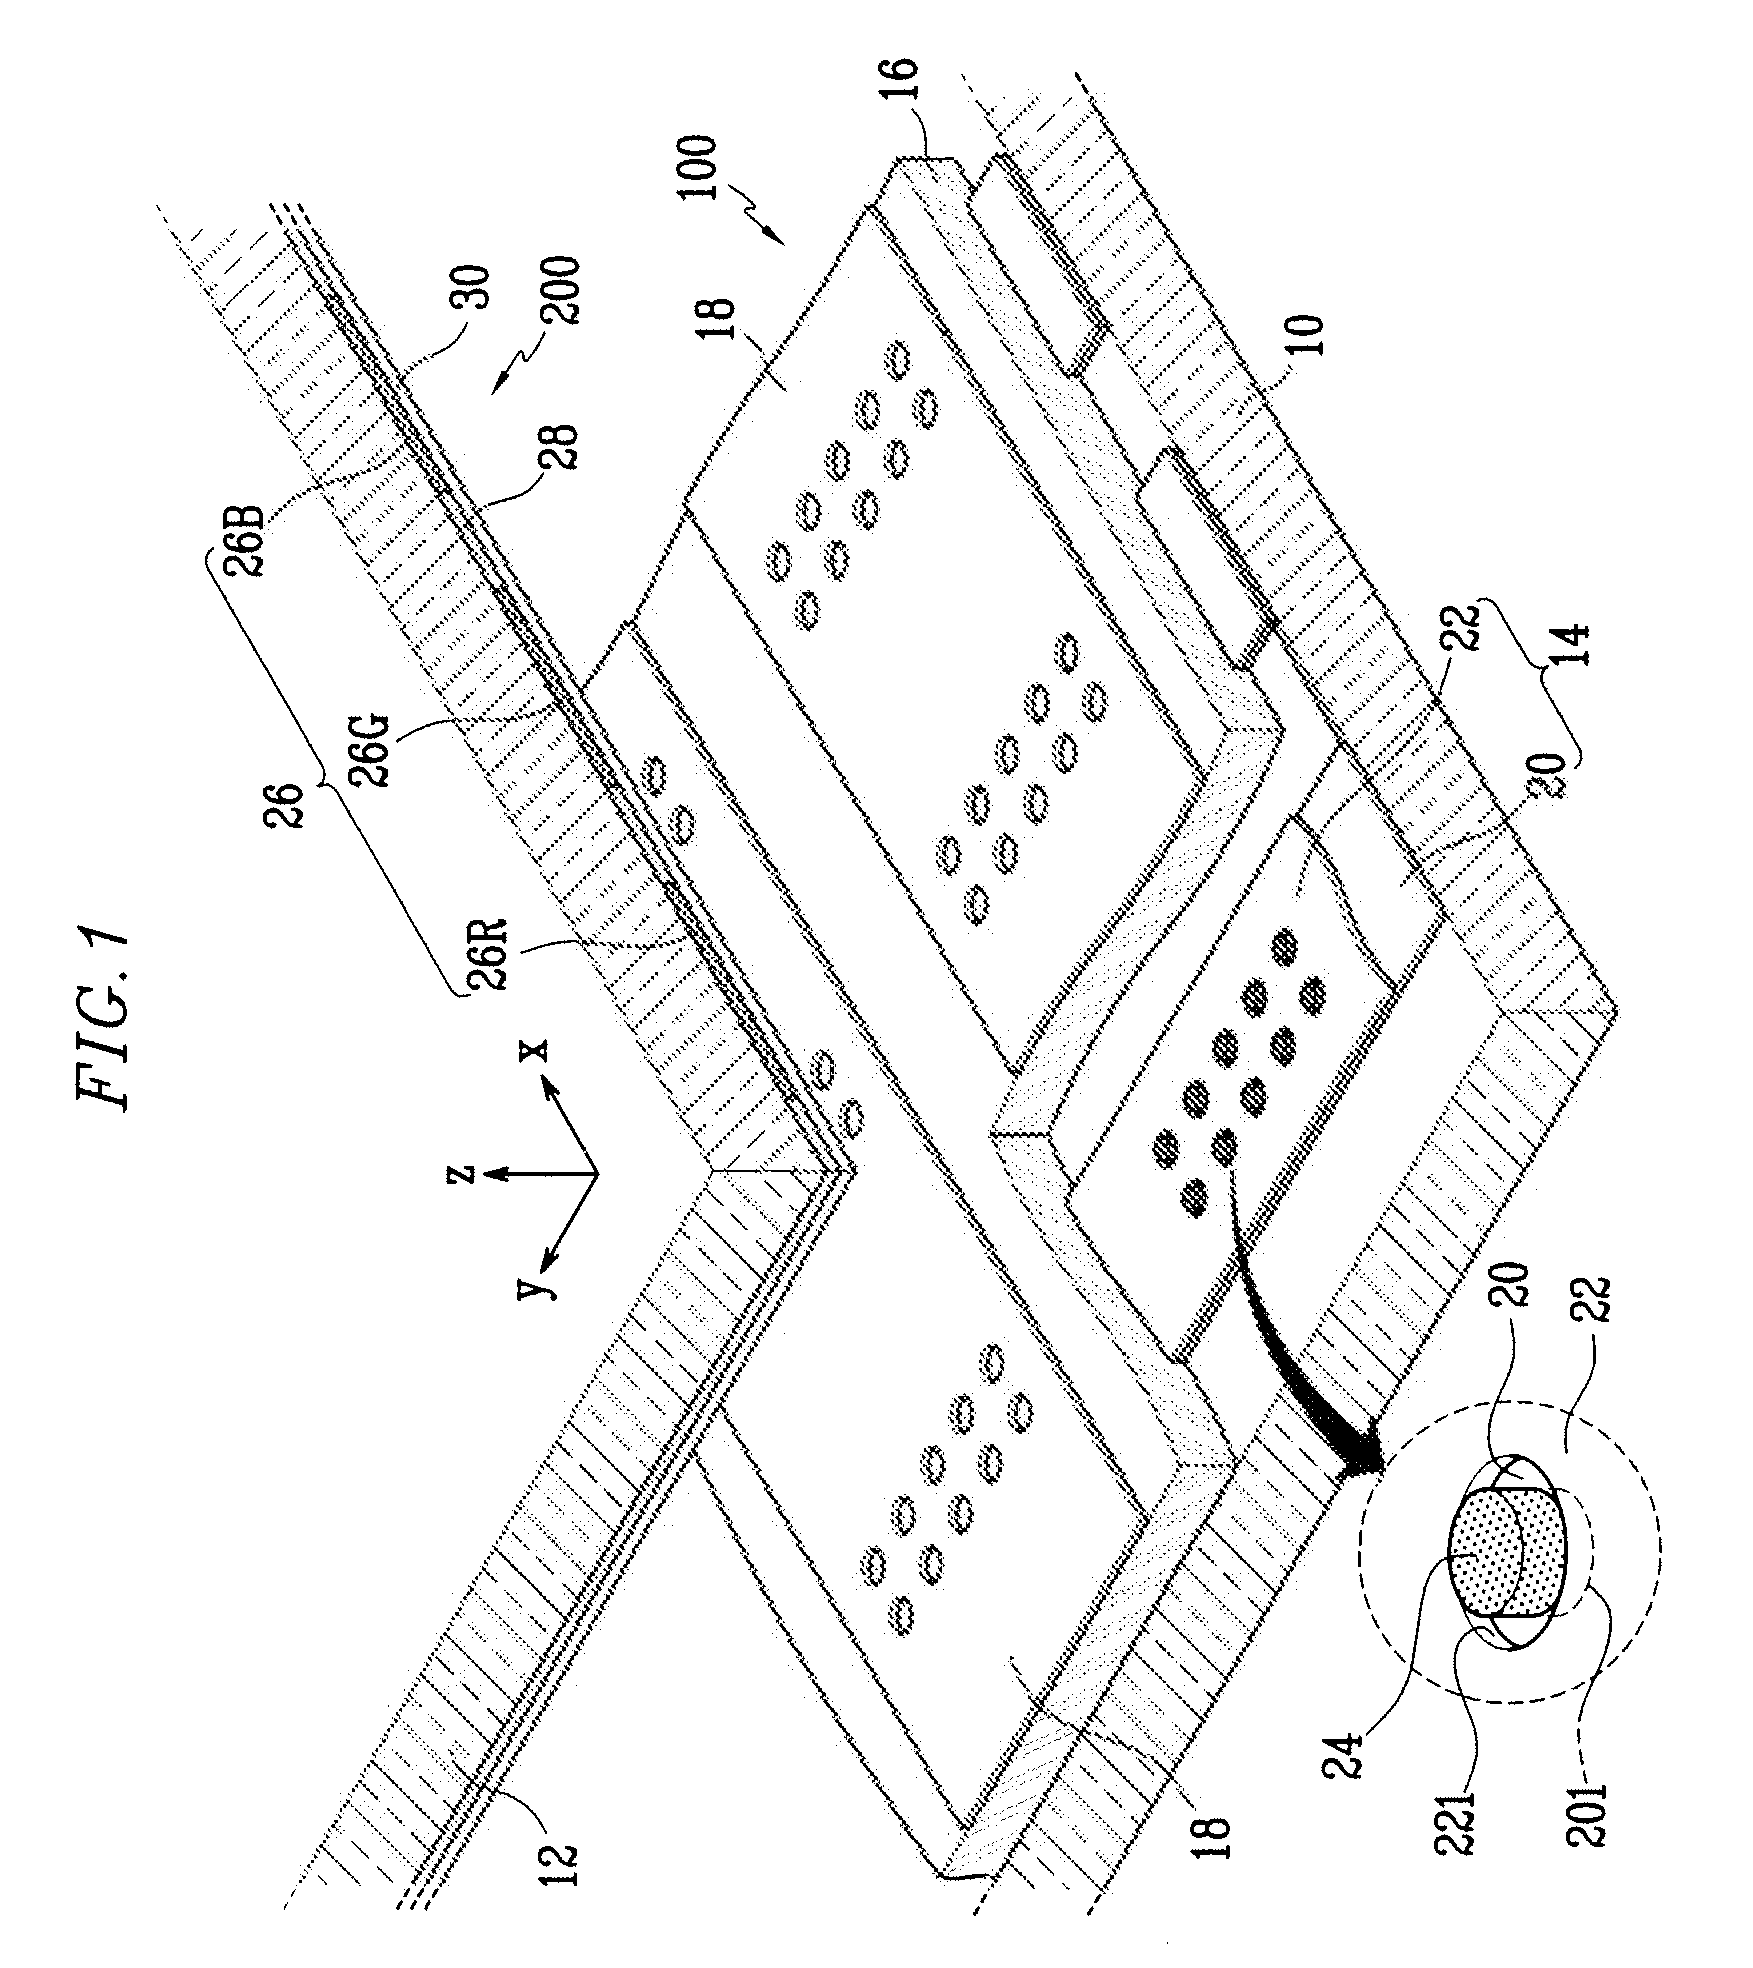 Electron emission device, manufacturing method of the device